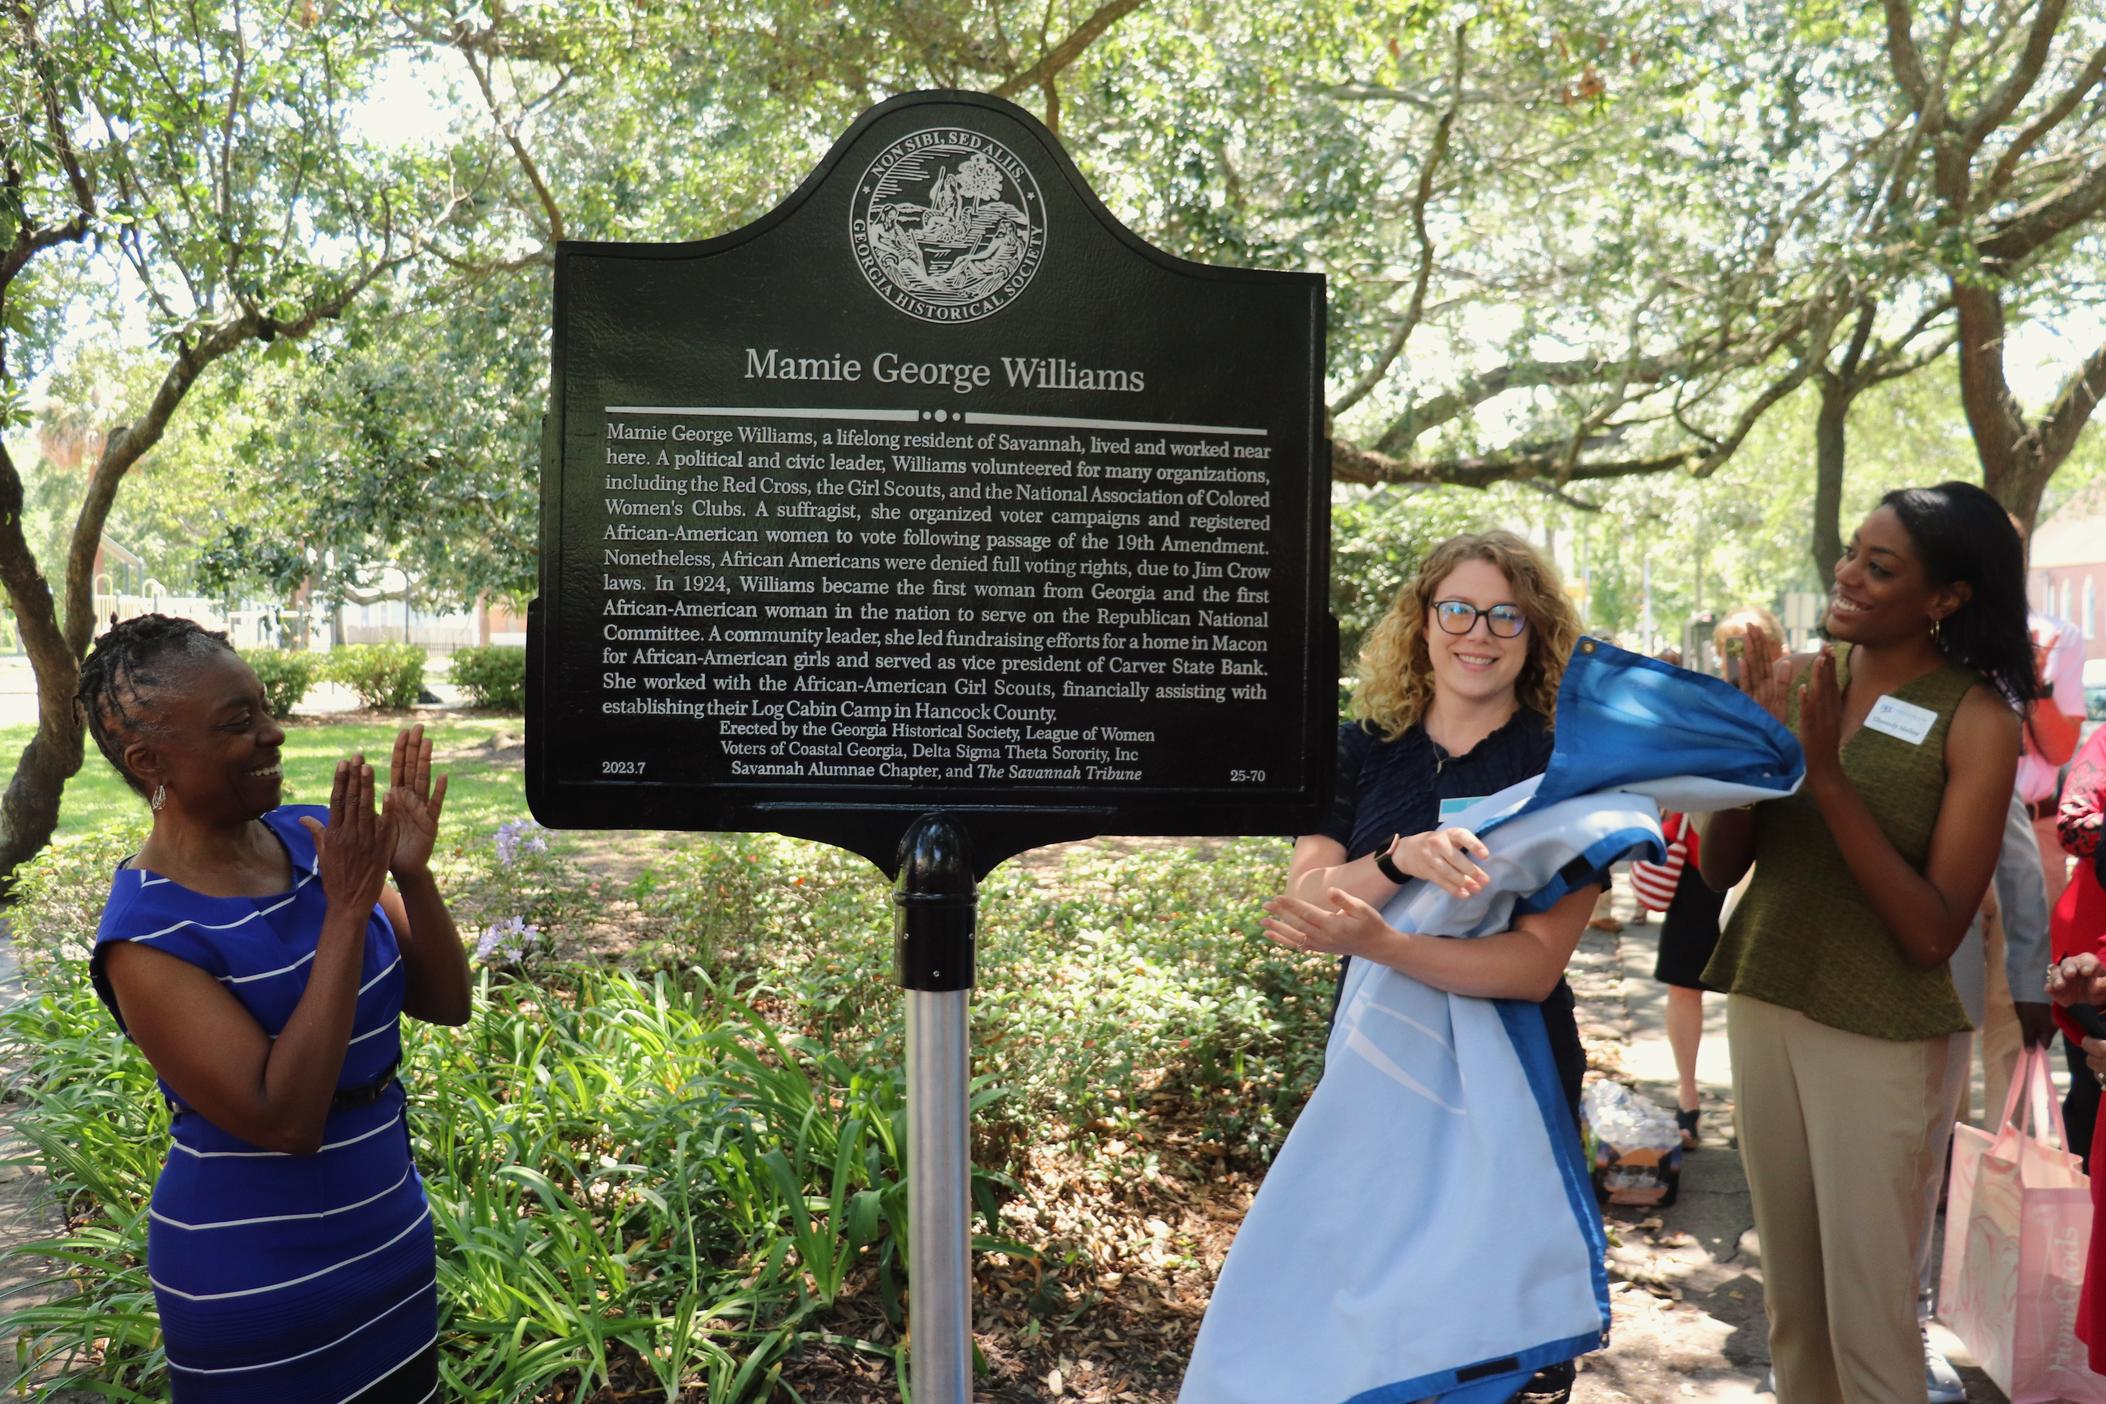 An unveiling ceremony for a new historical marker commemorating civil rights activist Mamie George Williams was held at Dixon Park in Savannah on May 25. Pictured from left to right: historian and author Velma Maia Thomas Fann, Georgia Historical Society marker program coordinator Breana James and League of Women Voters of Coastal Georgia president Chassidy Malloy.